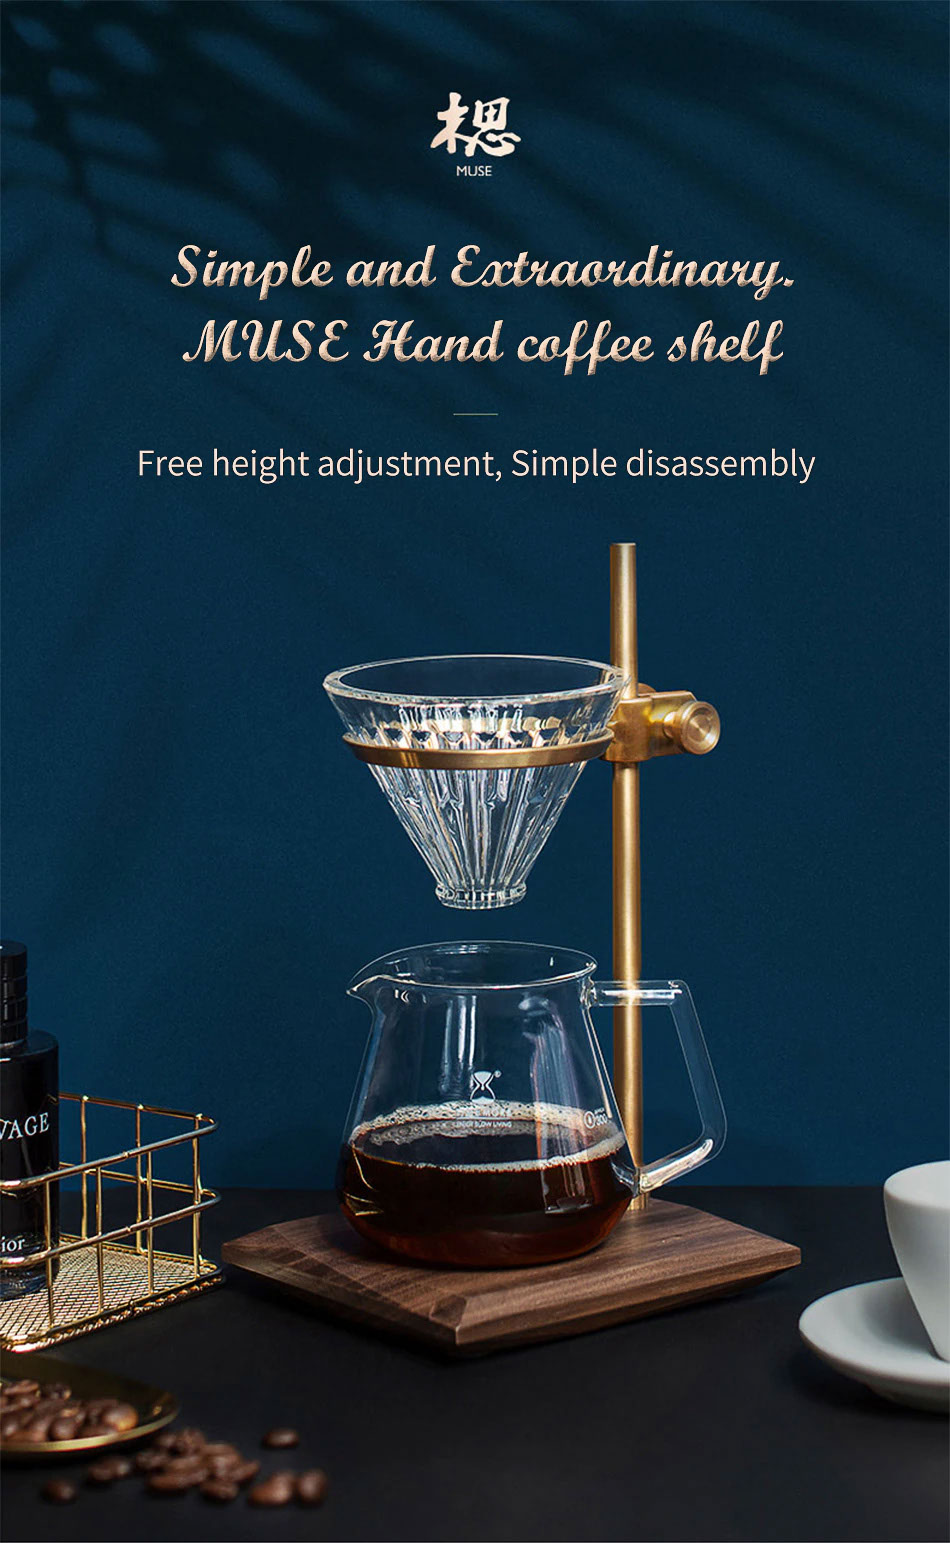 timemore muse brass pour over stand แท่นดริปกาแฟ 05